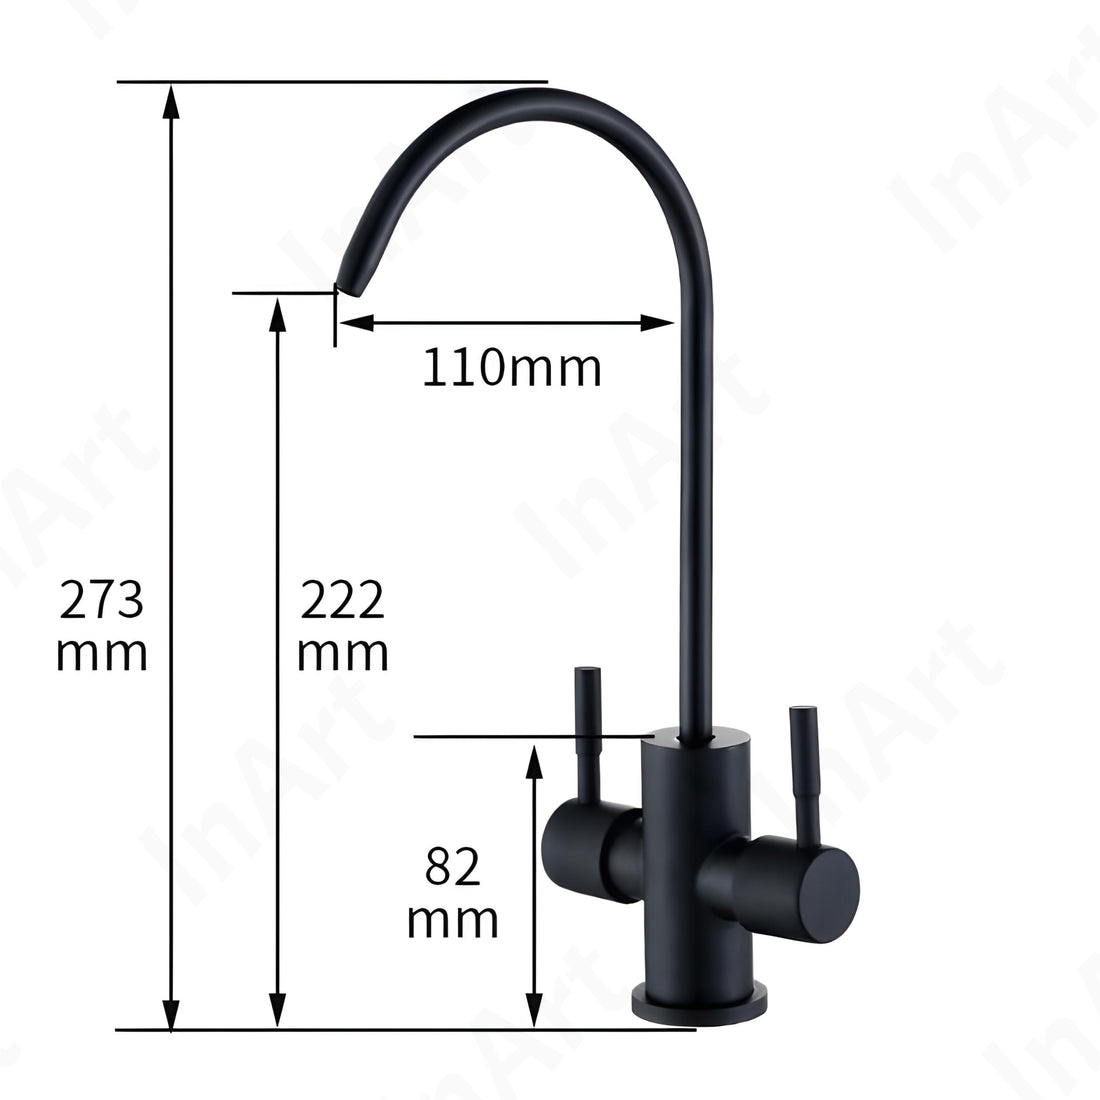 InArt Drinking Water Faucet for Kitchen Sink - Stainless Steel, Black Matt Finish, 360 Swivel, Non-Air Gap RO Faucet with 2-Year Warranty SS304, Two Way Water Drinking Faucet with Dual Handles KSF056